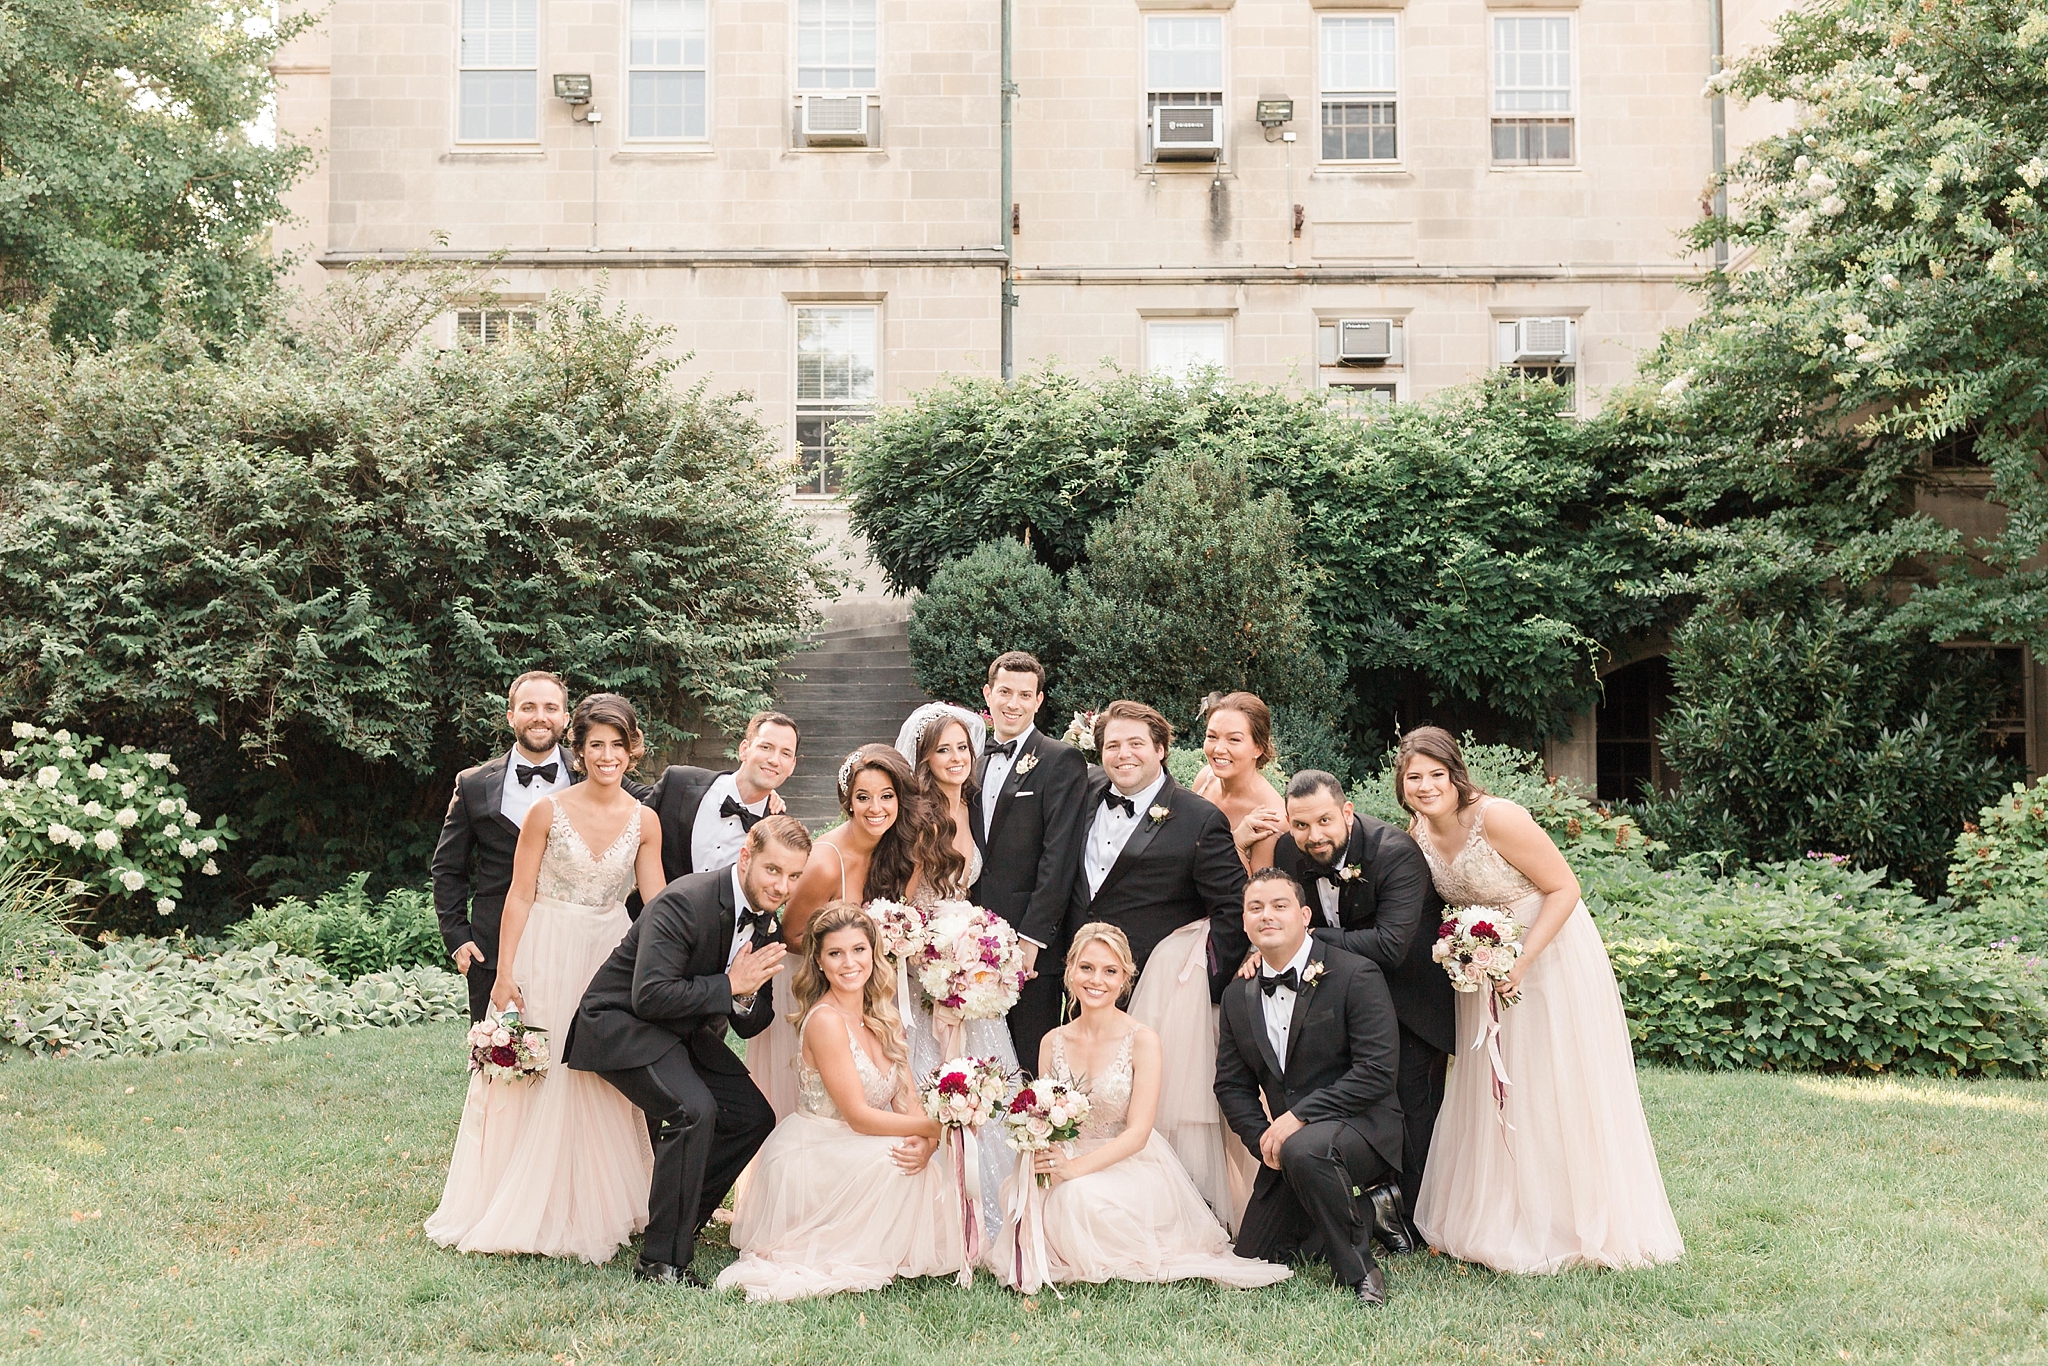 This glamorous summer wedding at Running Hare Vineyard features a palette of blush and gold and is captured by DC photographer Alicia Lacey.